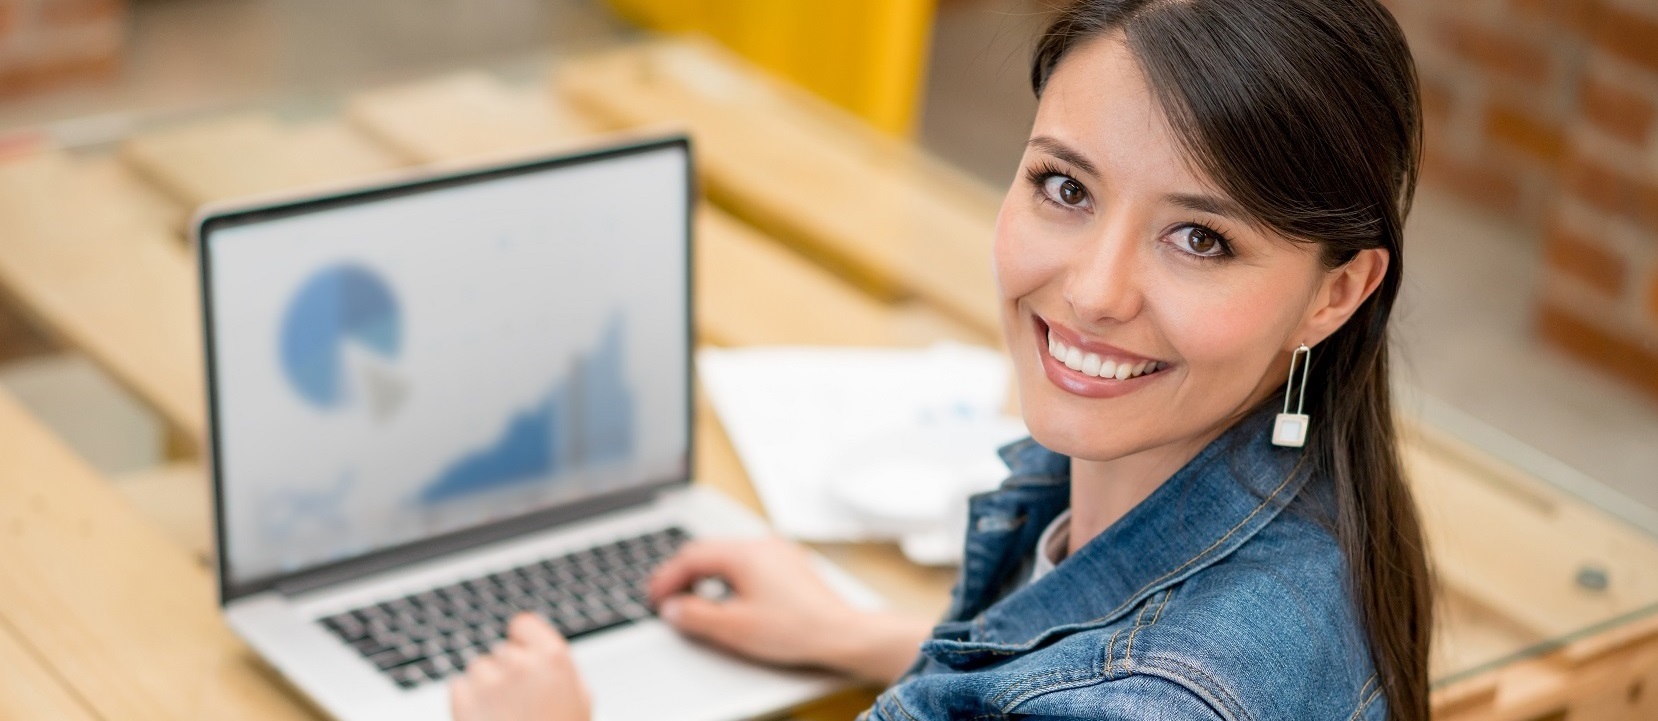 Happy female graphic designer working at the office using her laptop and looking at the camera smiling